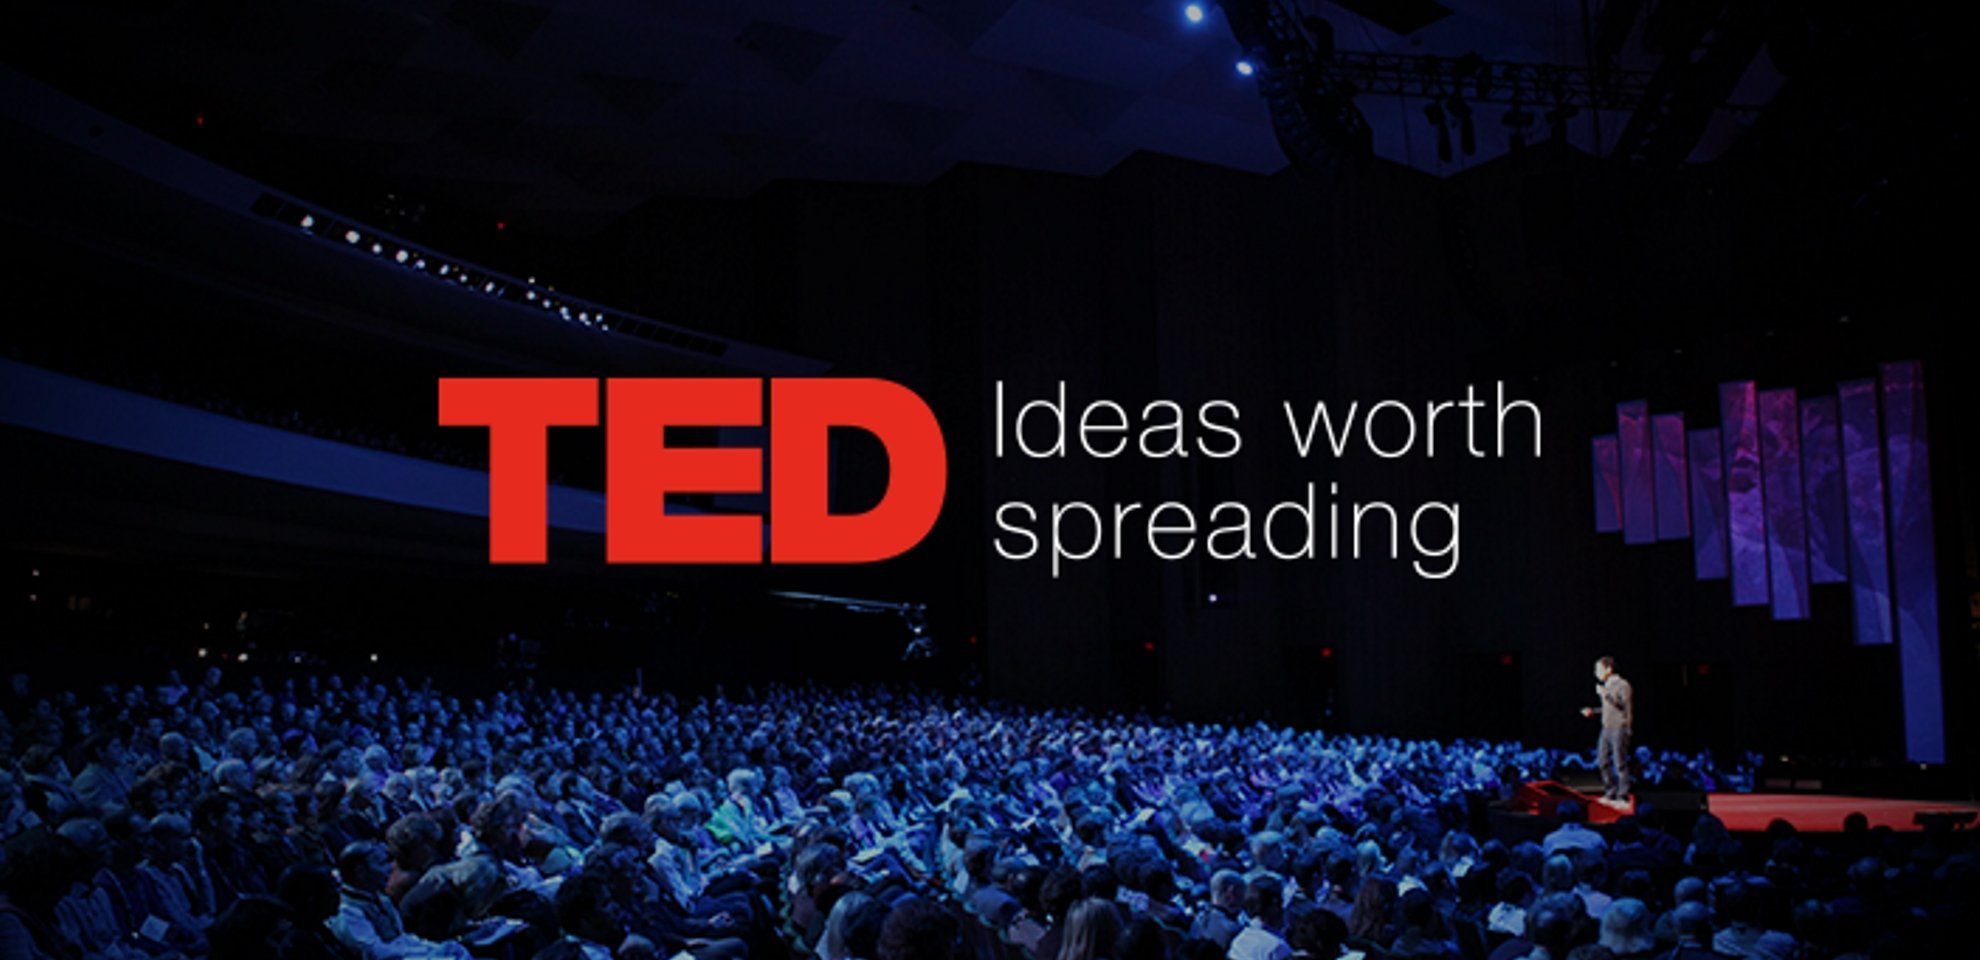 SOME AMAZING TED TALKS ON AUTISM